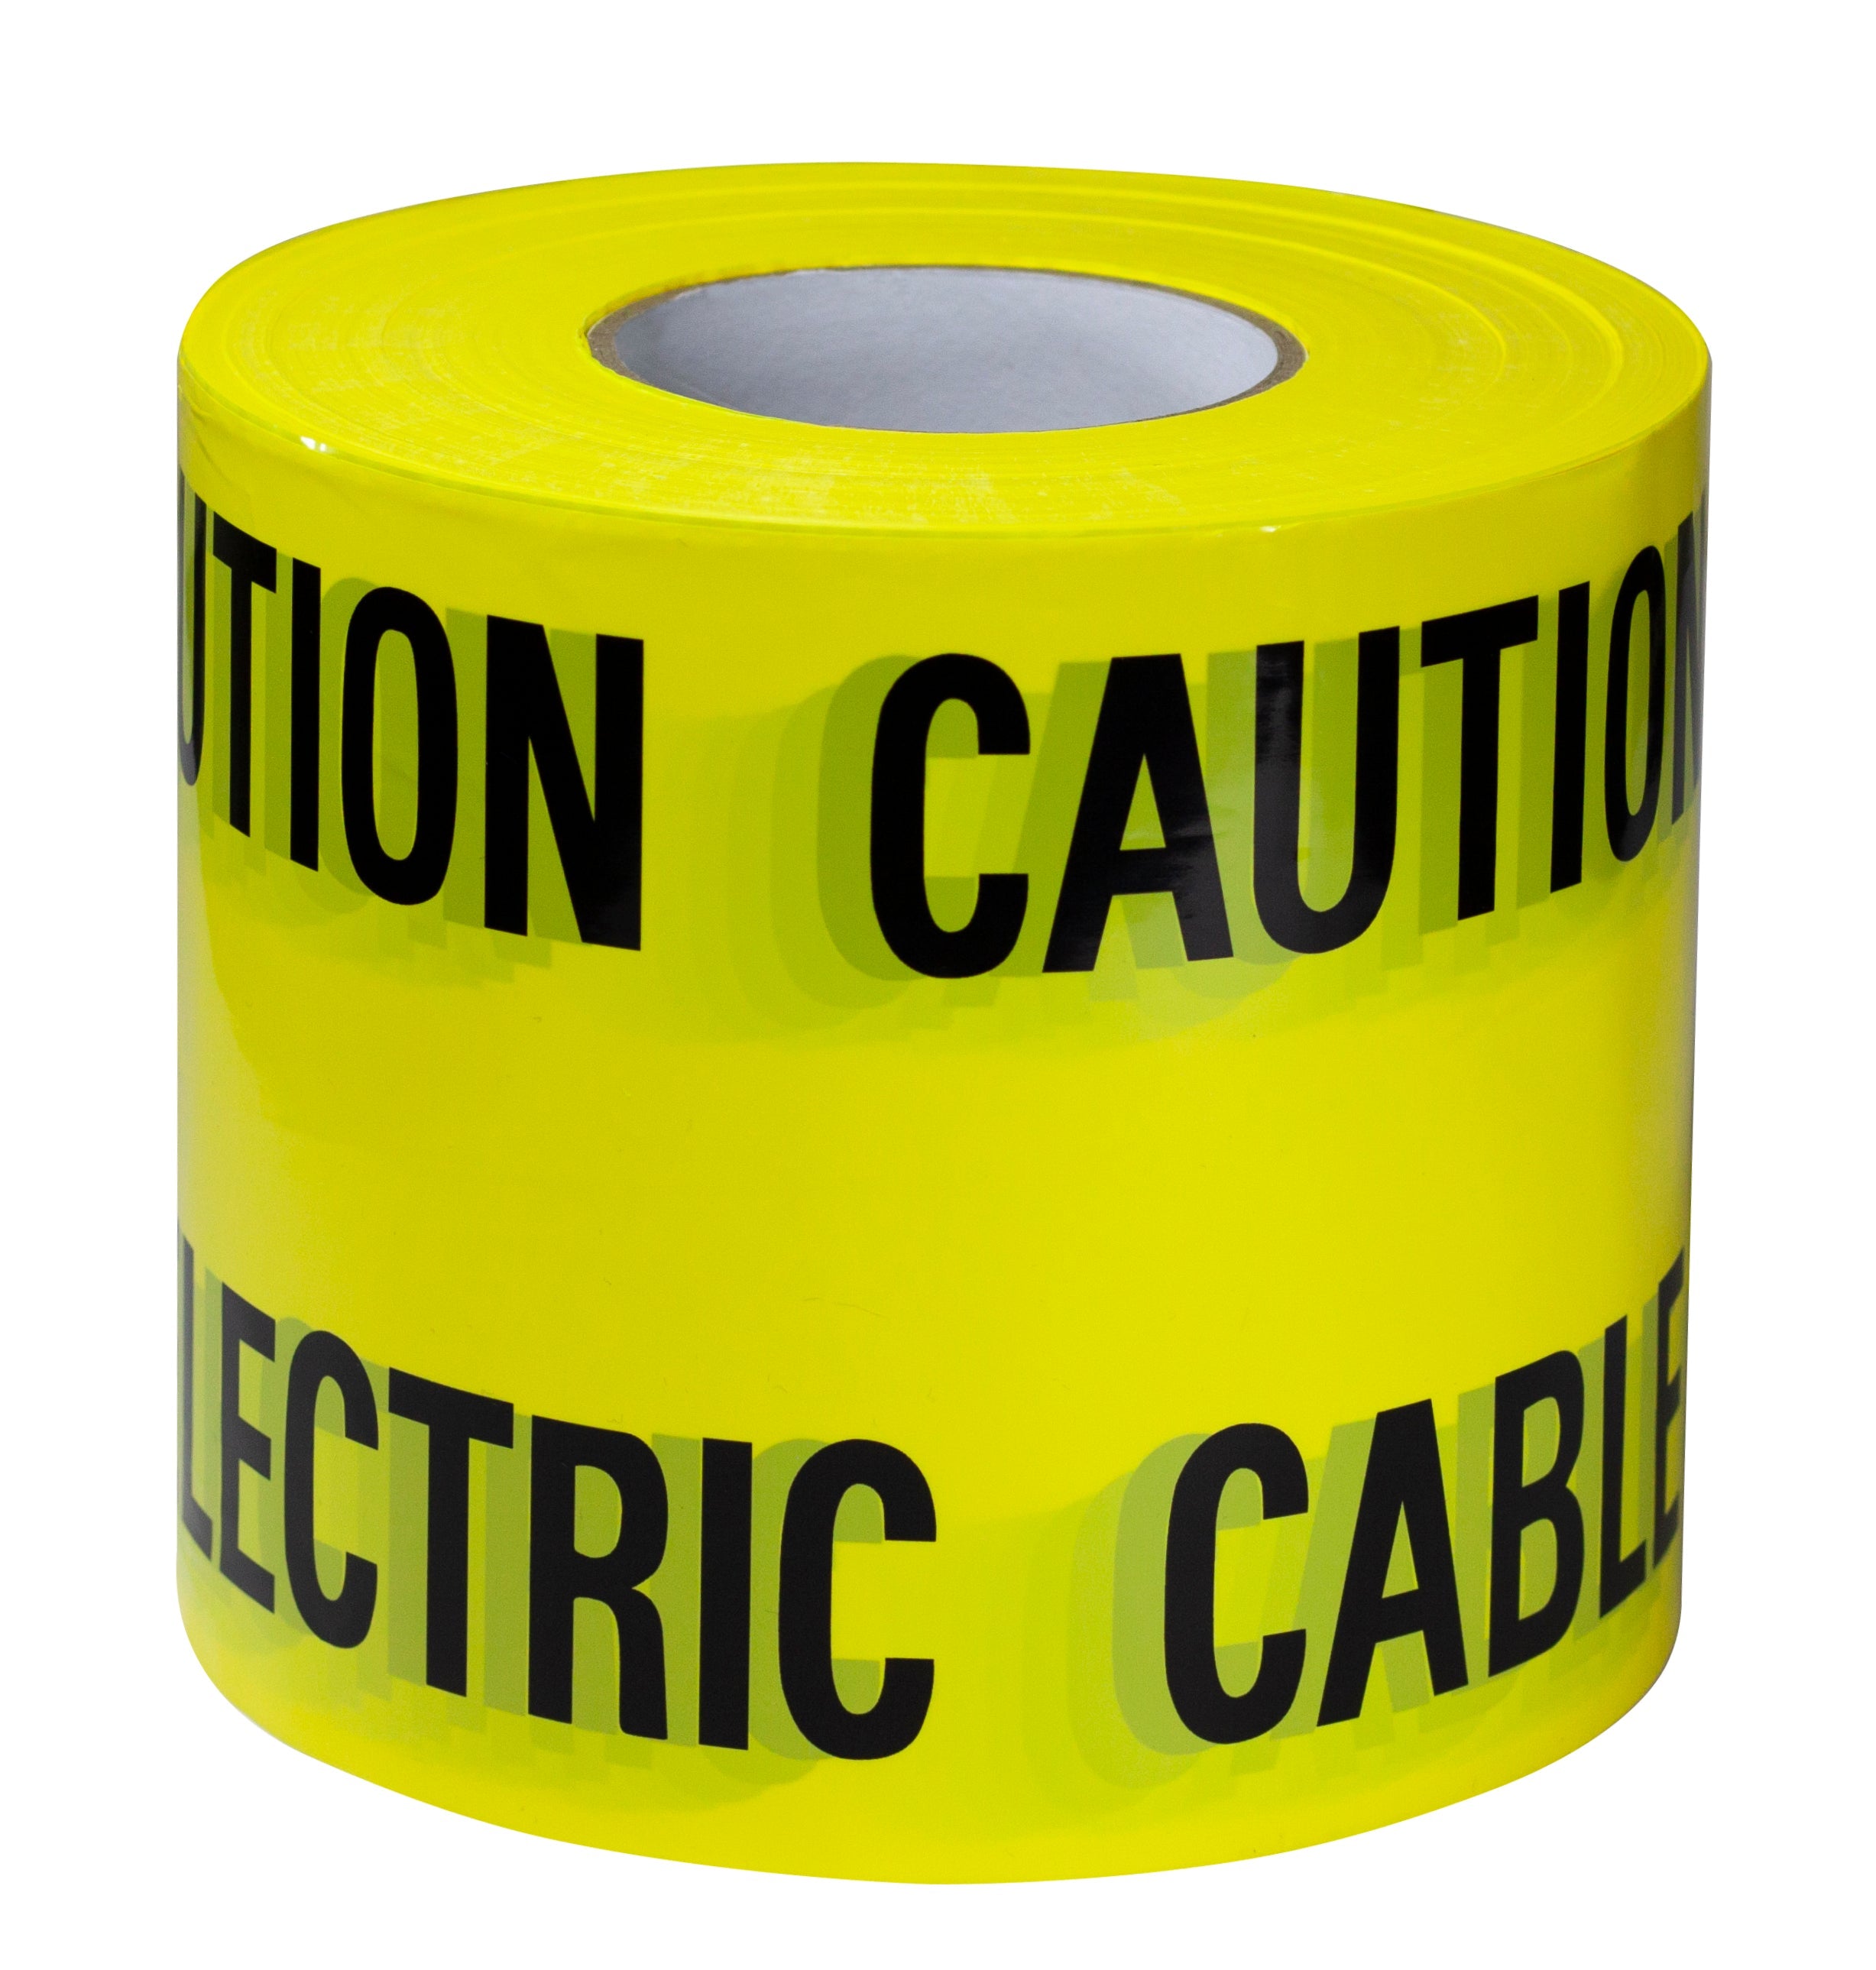 CAUTION ELECTRIC CABLE BELOW Tape 150mm x 365m - Per Pack